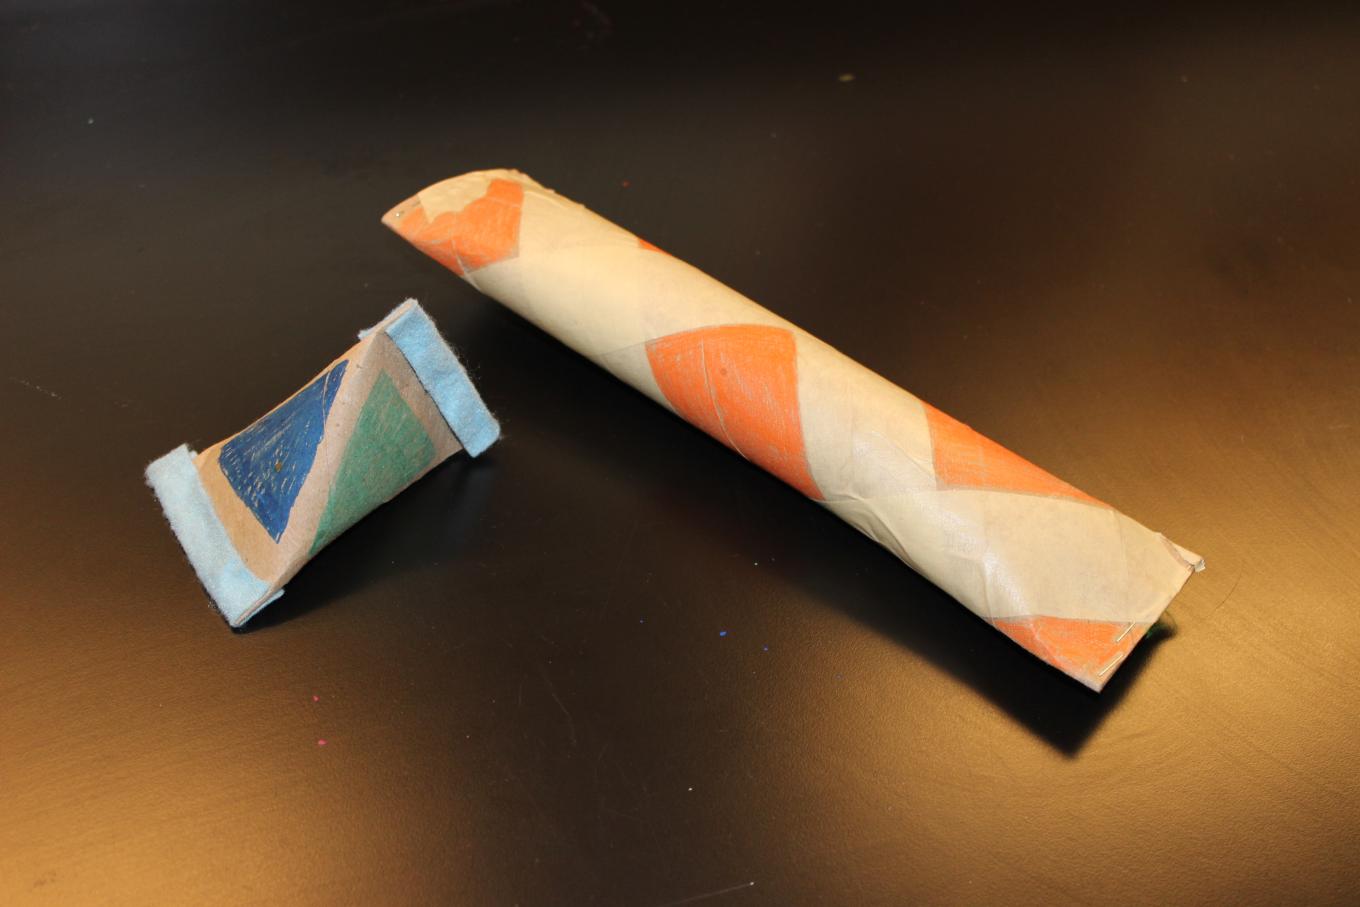 (Option 2 examples) A triangular maraca made out of a toilet paper roll (on left) and a rain stick made out of a paper towel roll (on right). Photo: Hayley Prihoda